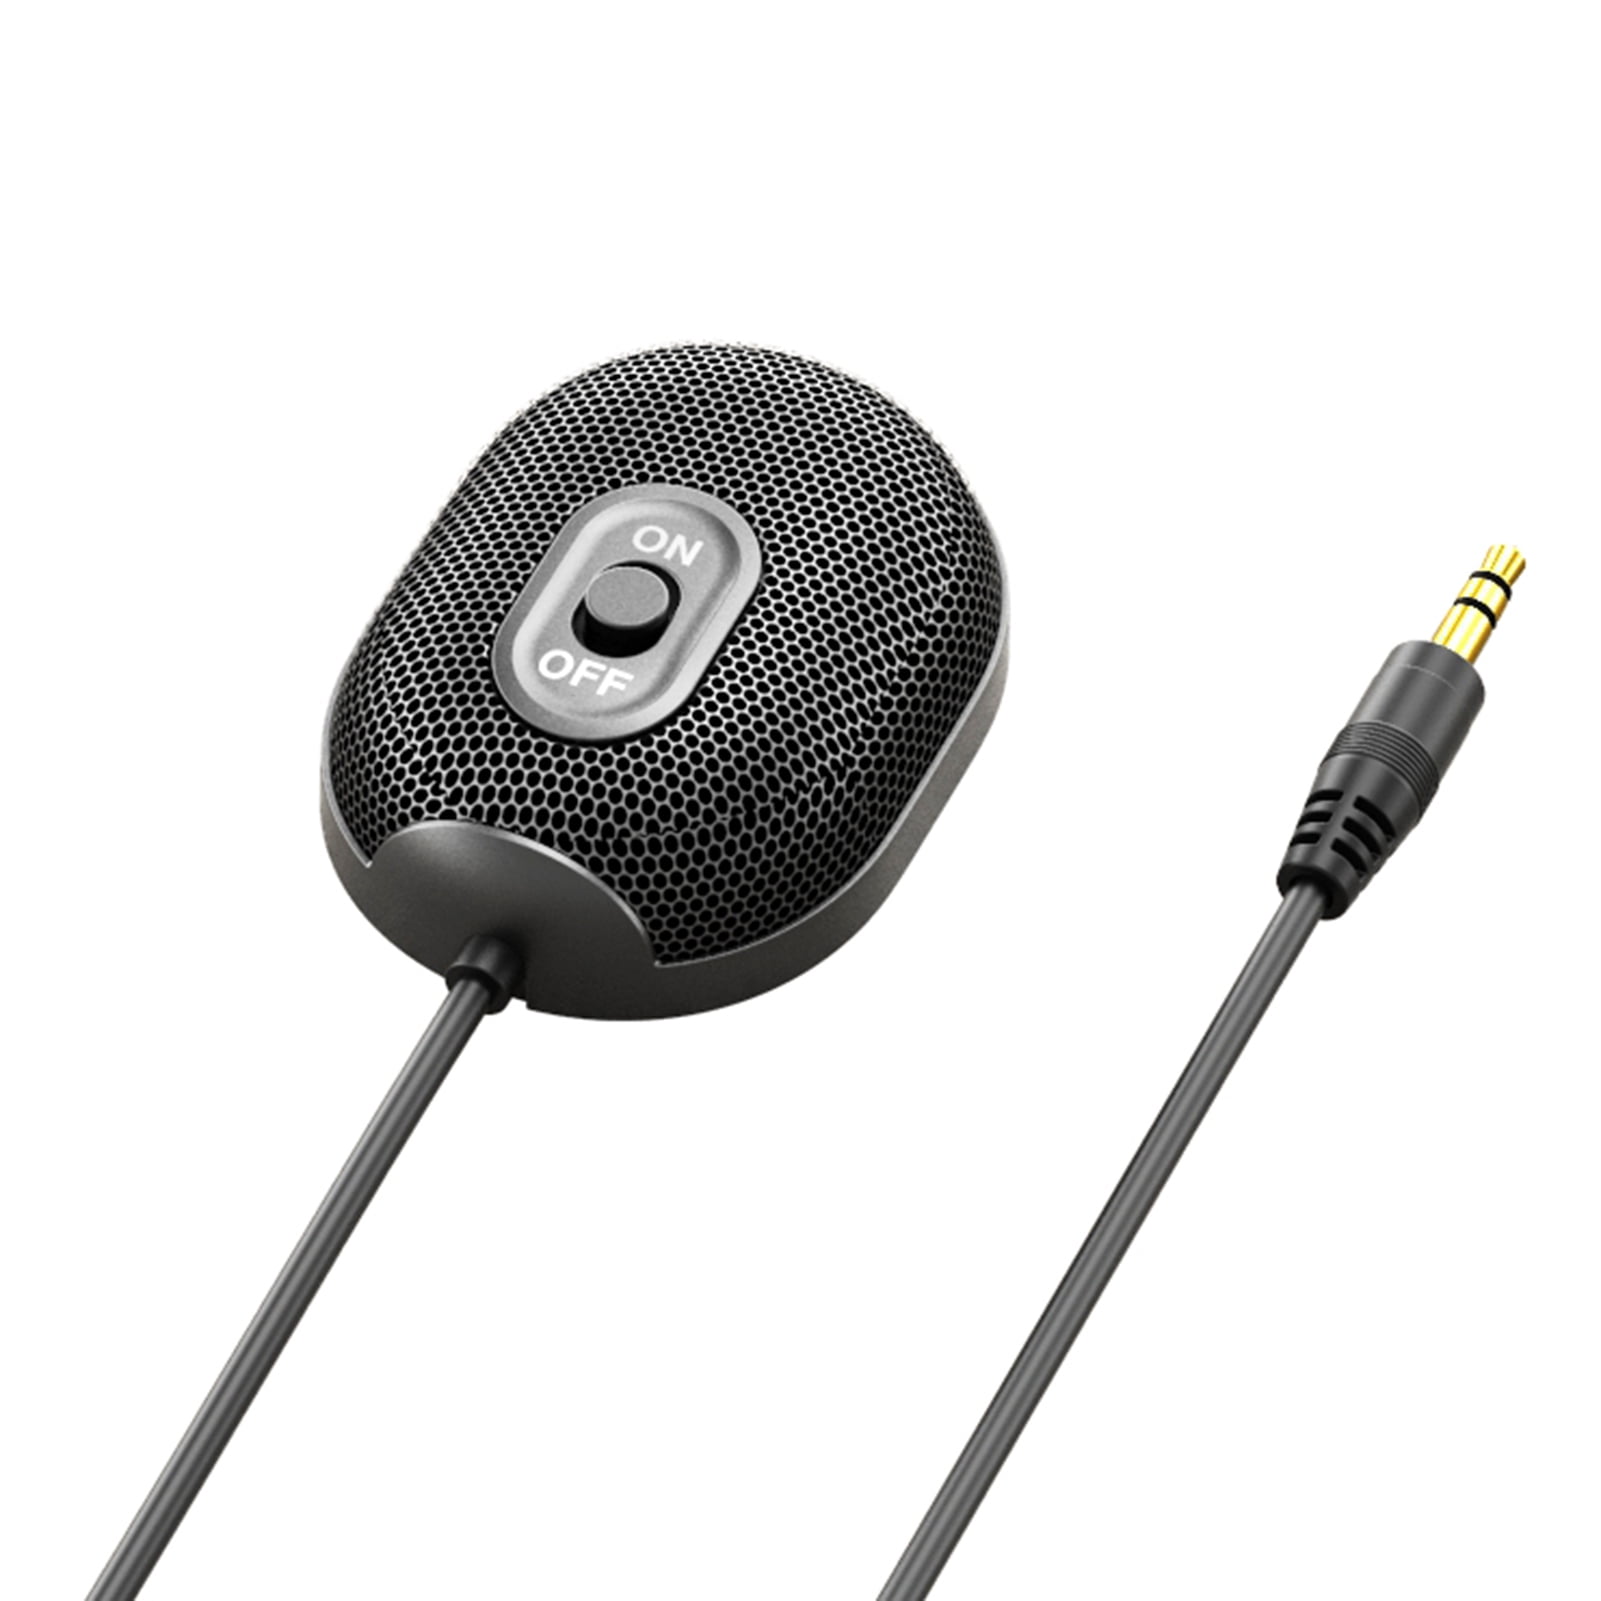 Black Mini 360° Omnidirectional Microphone for Computer 3.5mm Conference Microphone Portable PC Microphone Plug & Play Microphone for Skype/Video Conference/Gaming/Chatting/Recording